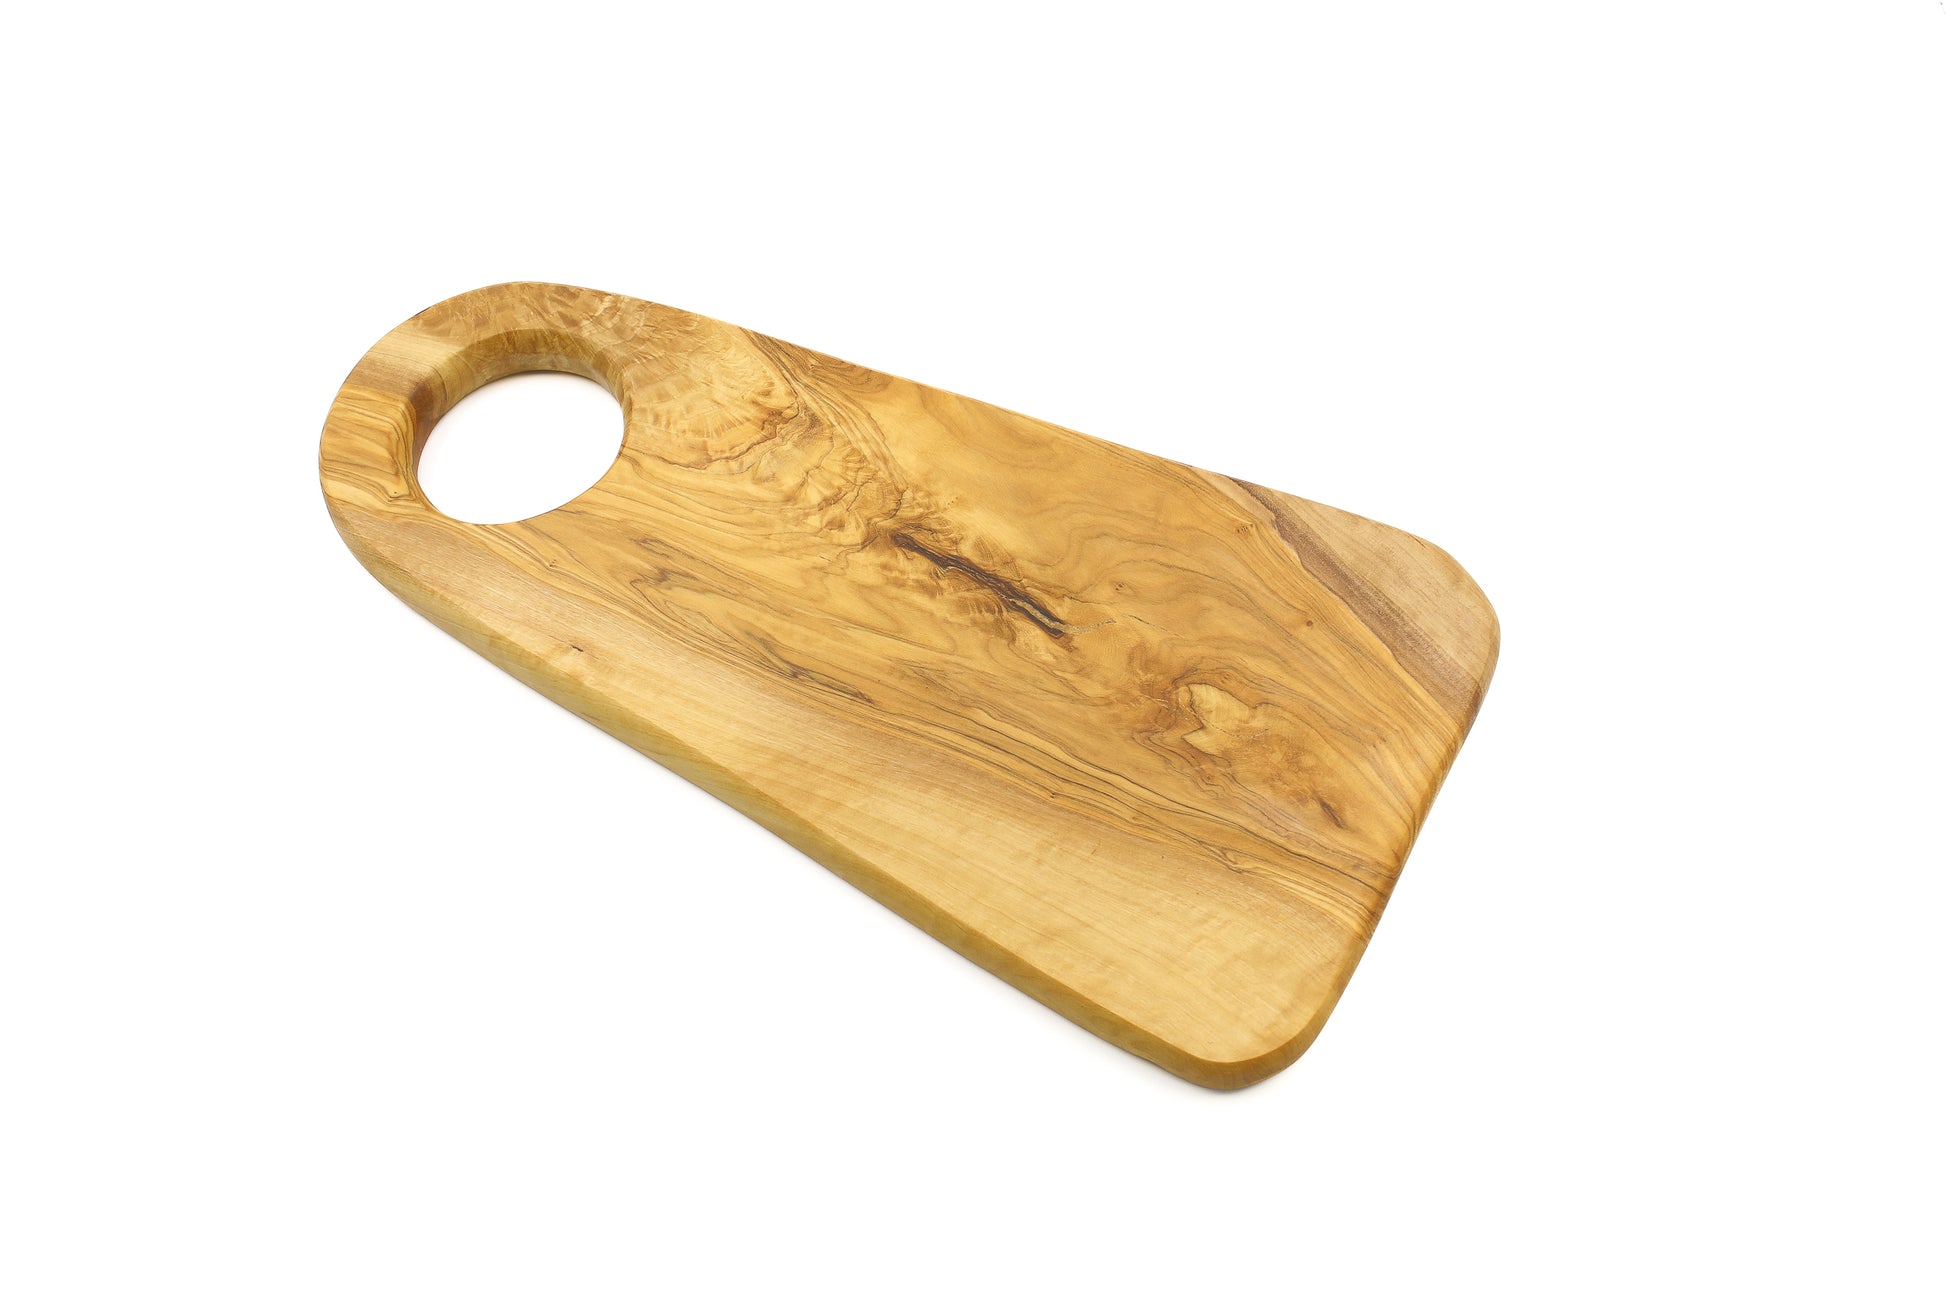 Fashionable oval serving board crafted from olive wood, elegant display